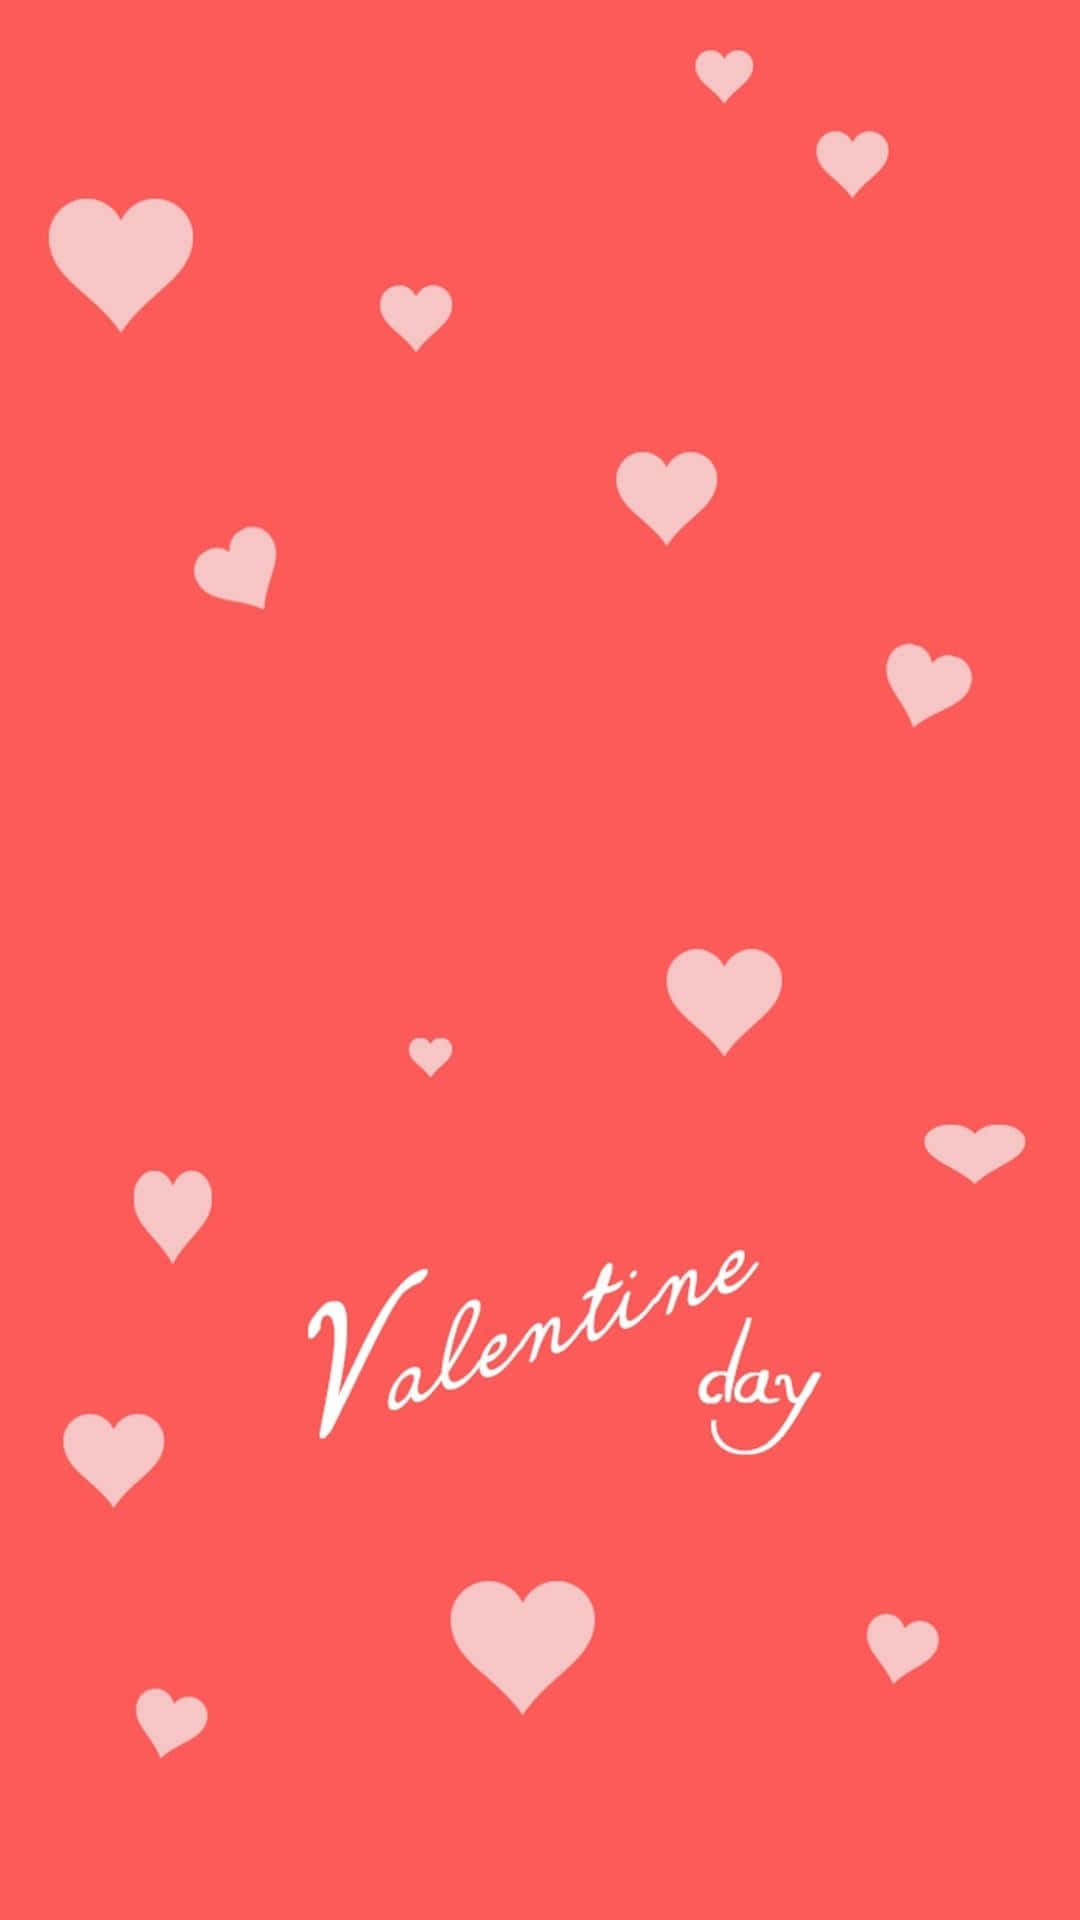 Express Your Love with a Valentines Day Phone Wallpaper